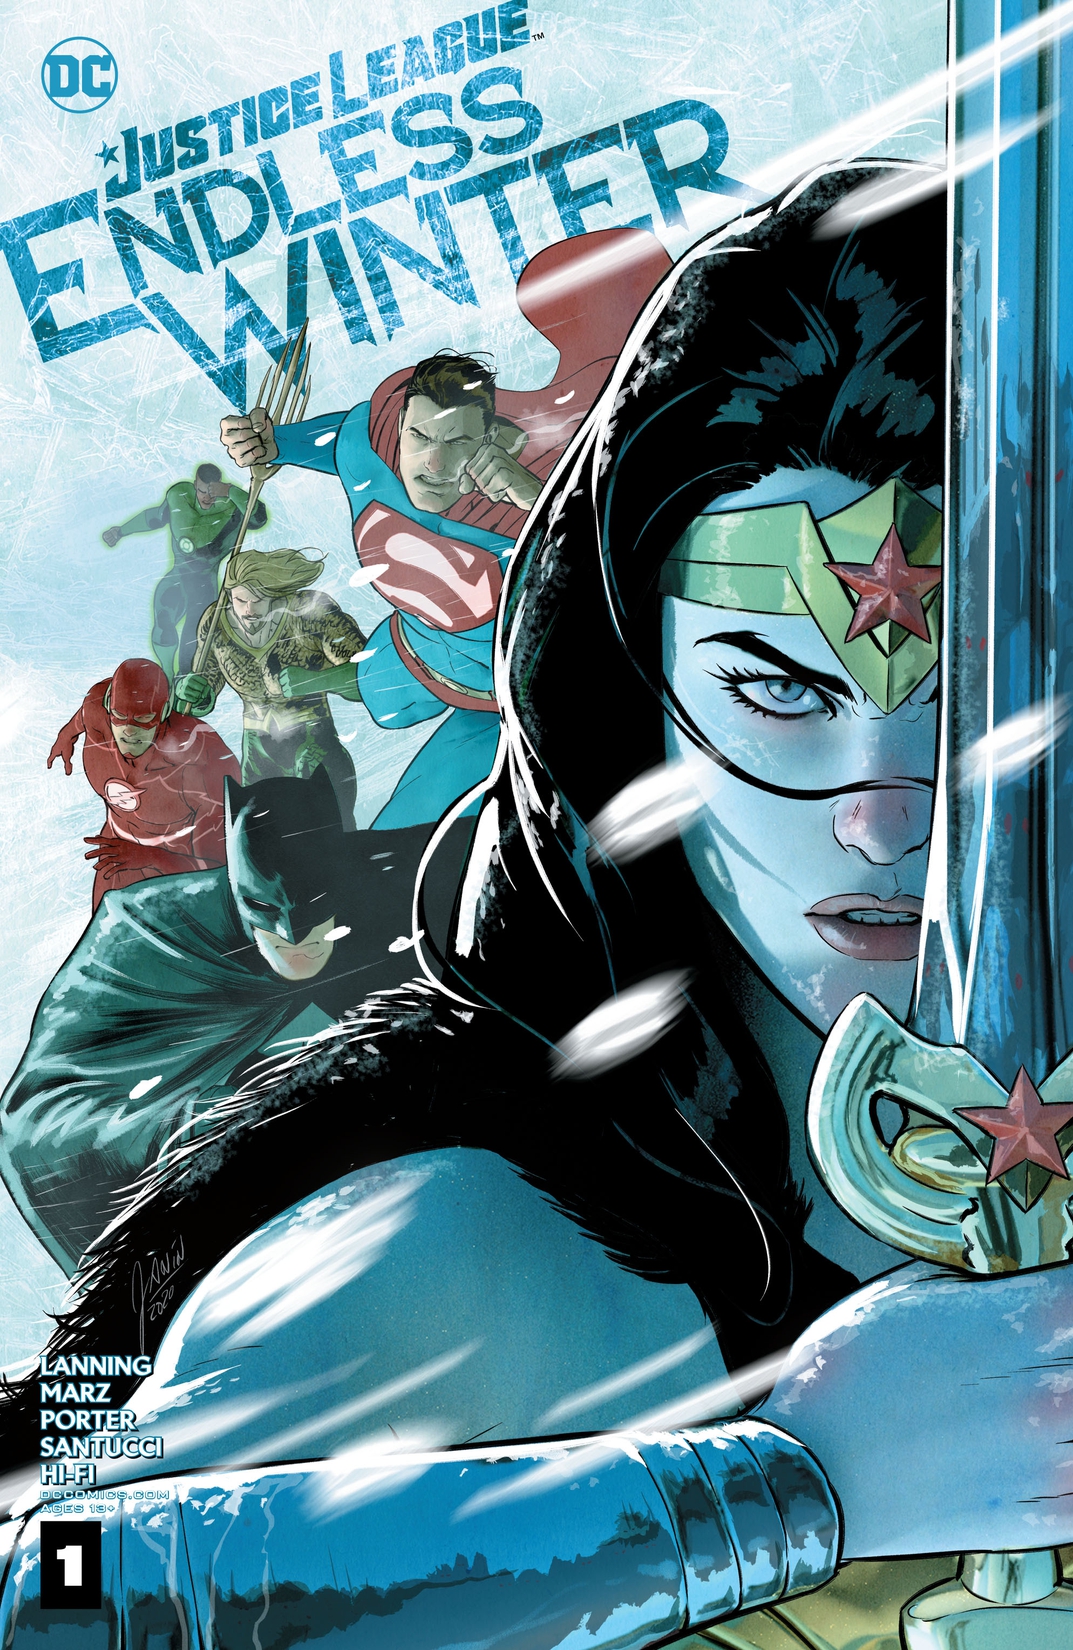 Justice League: Endless Winter #1 preview images